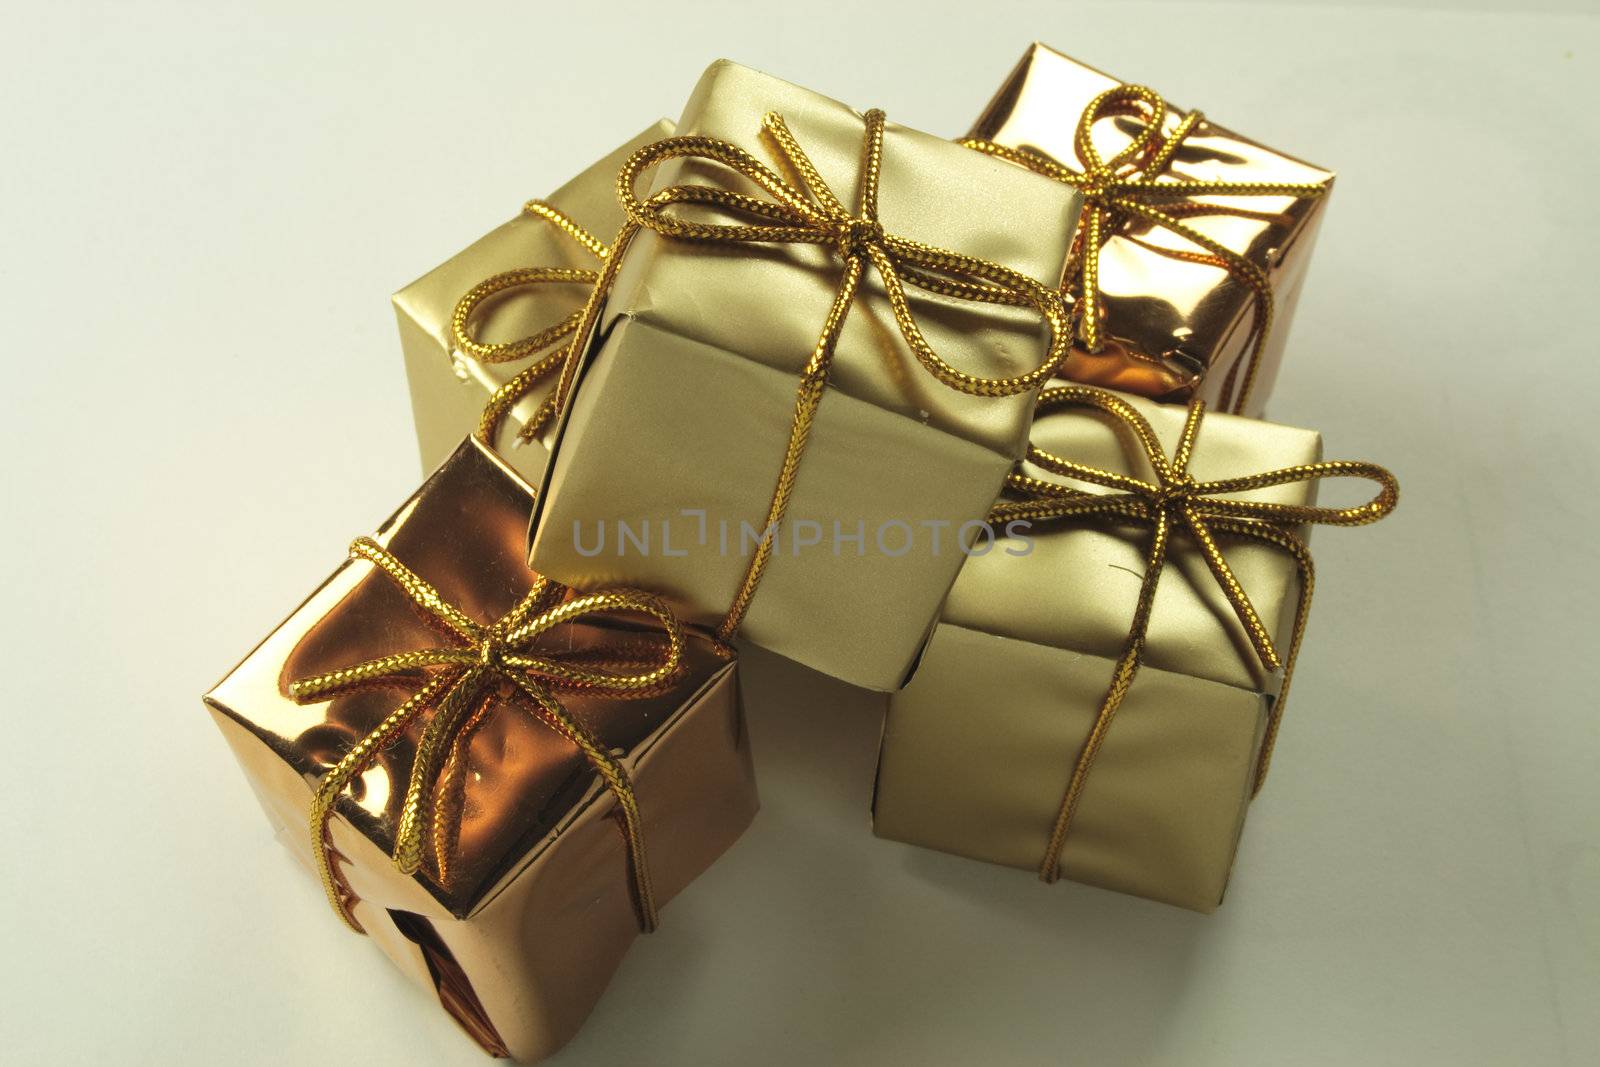 gold present decorations by leafy